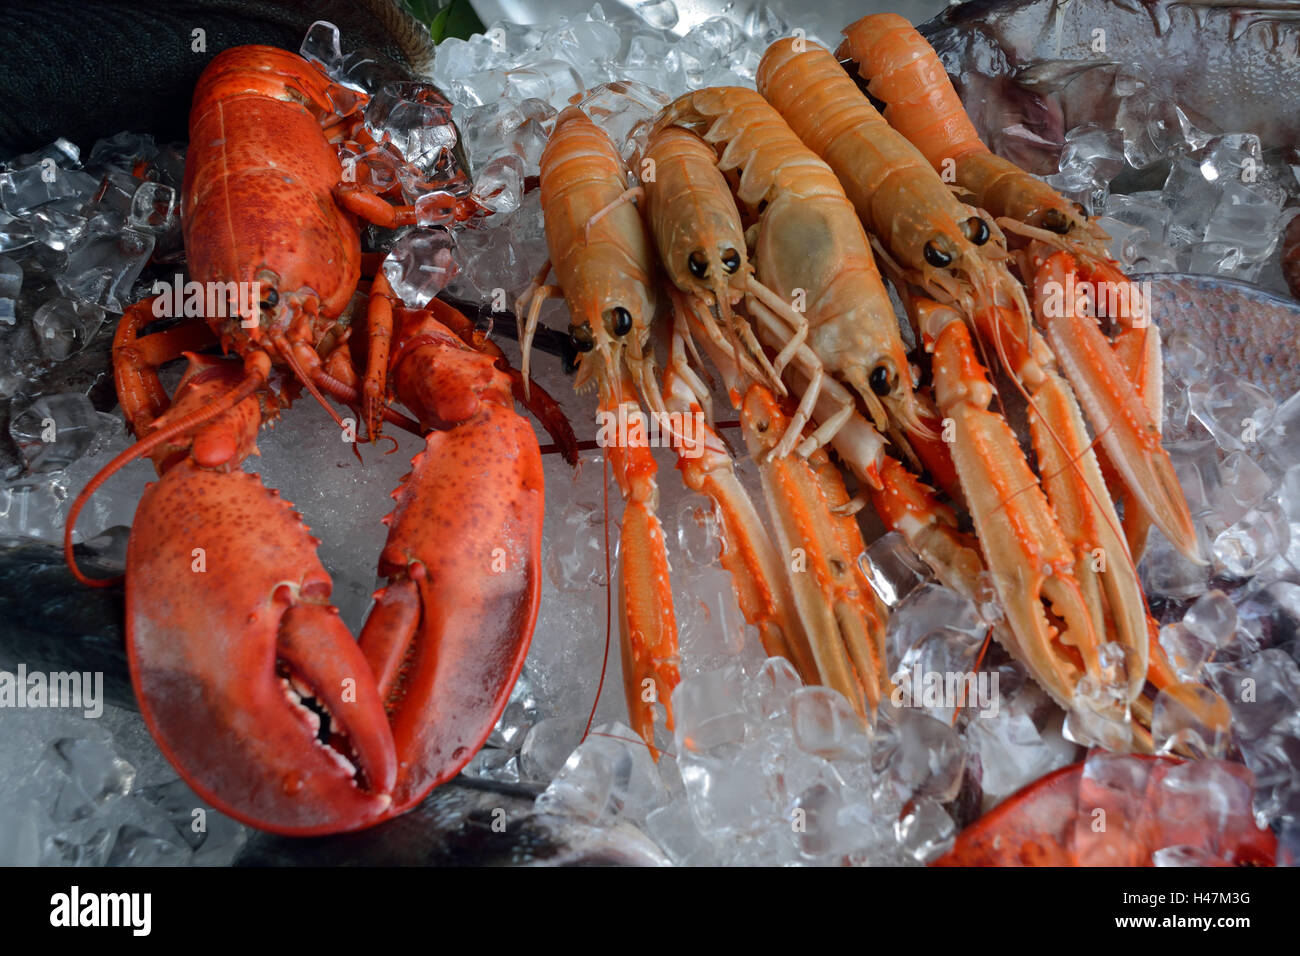 Seafood from the Adriatic Sea on a fish market on the Rialto Bridge of Venice in Italy. Stock Photo